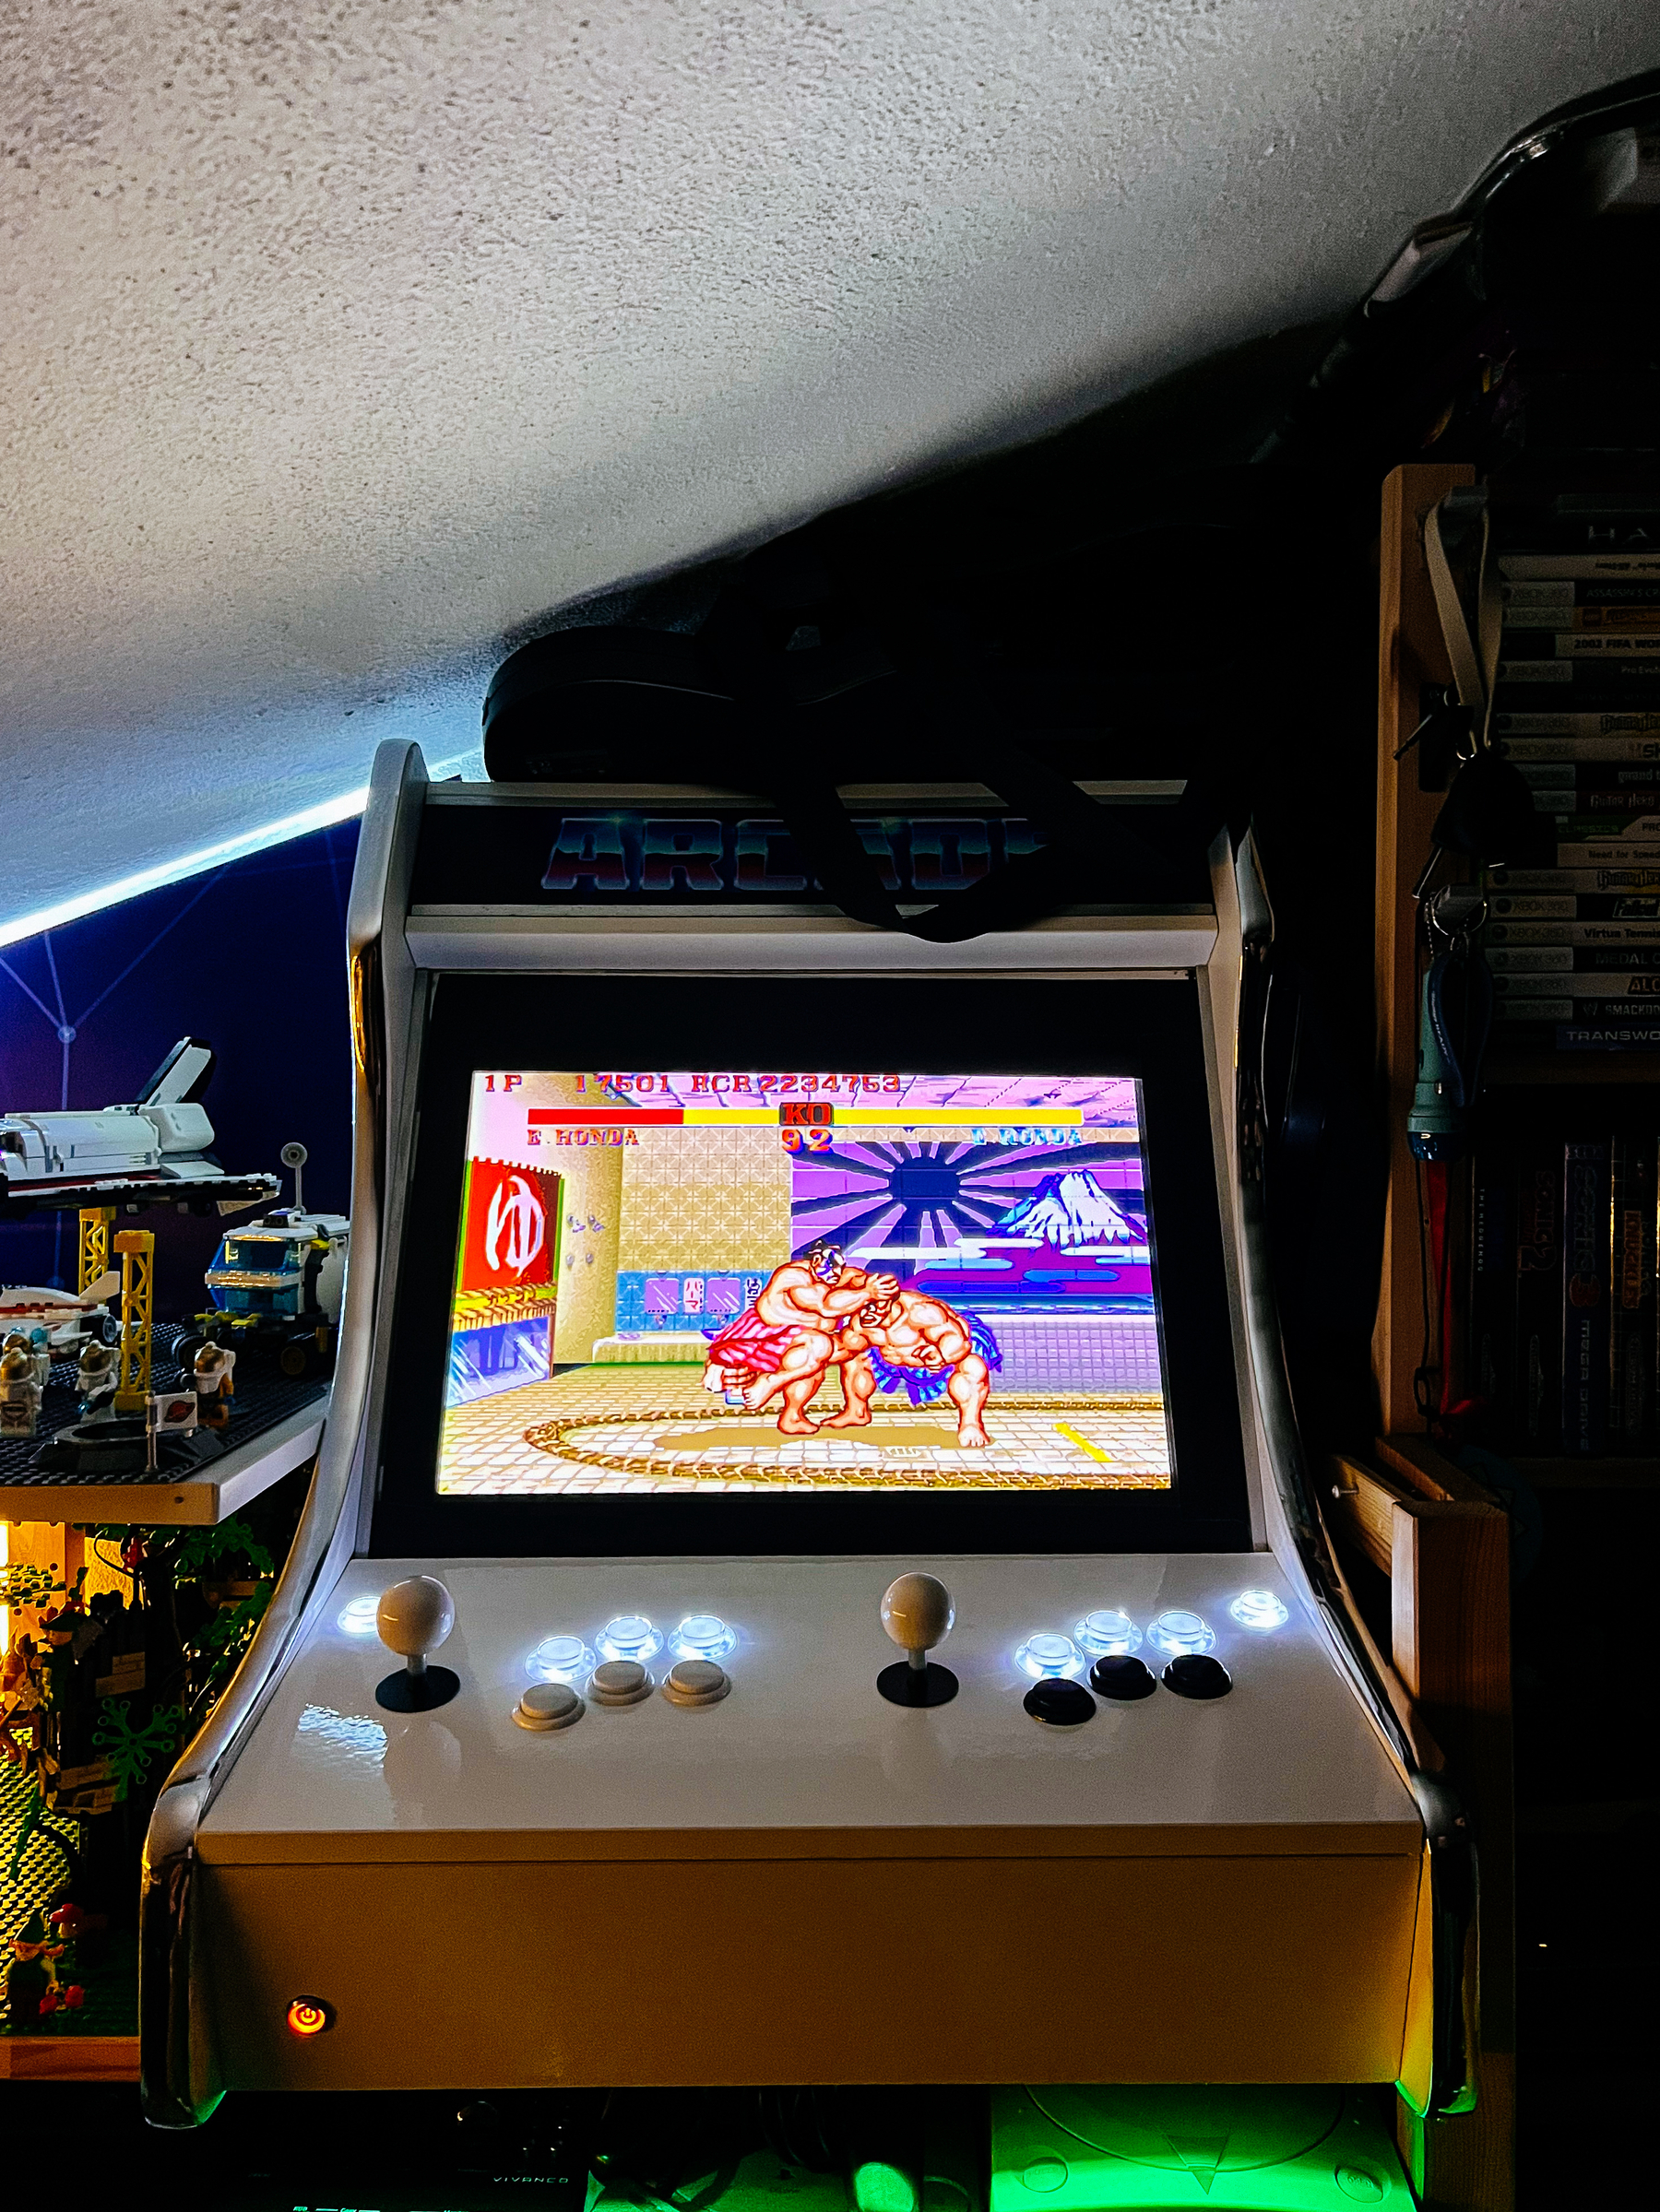 An arcade machine with the game &lsquo;Street Fighter II&rsquo; on the screen, set in a room with ambient lighting and shelves of books and Lego models.